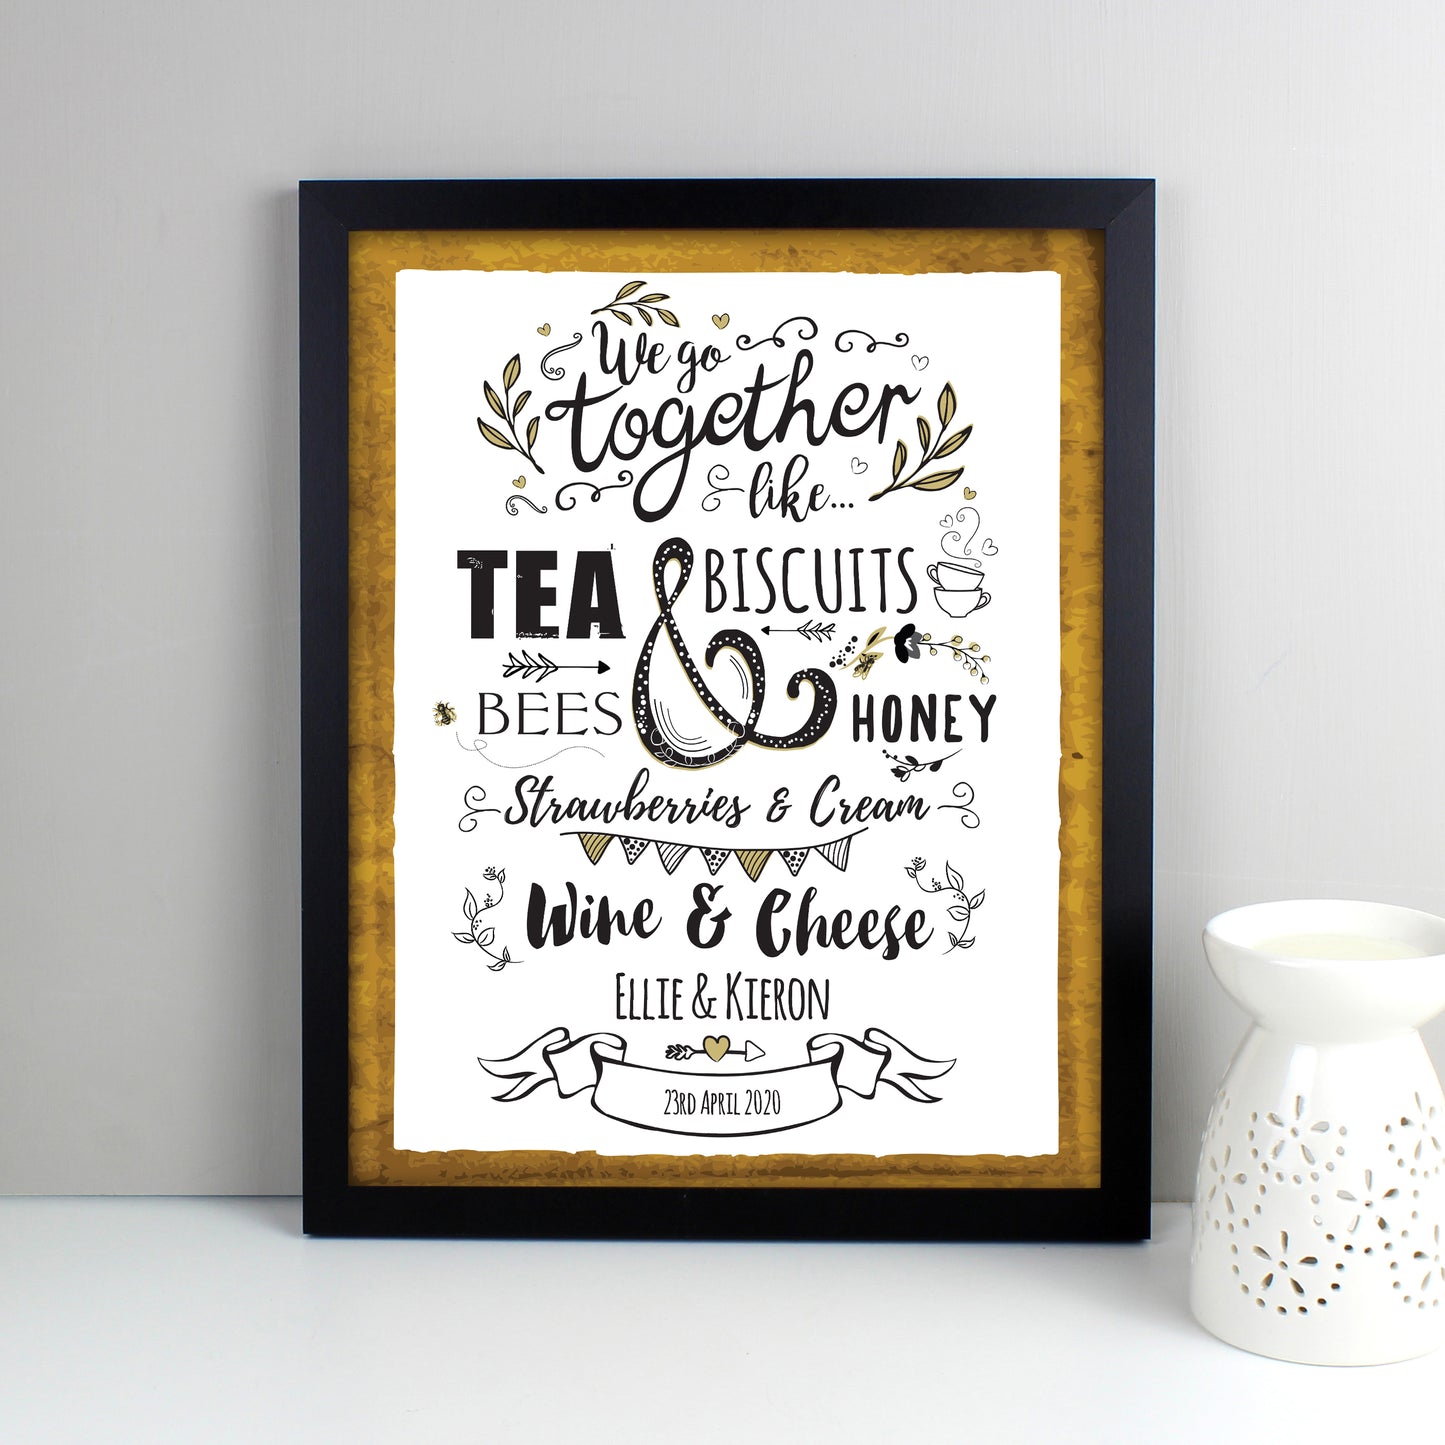 Personalised We Go Together Like... Black Framed Print - Personalise It!